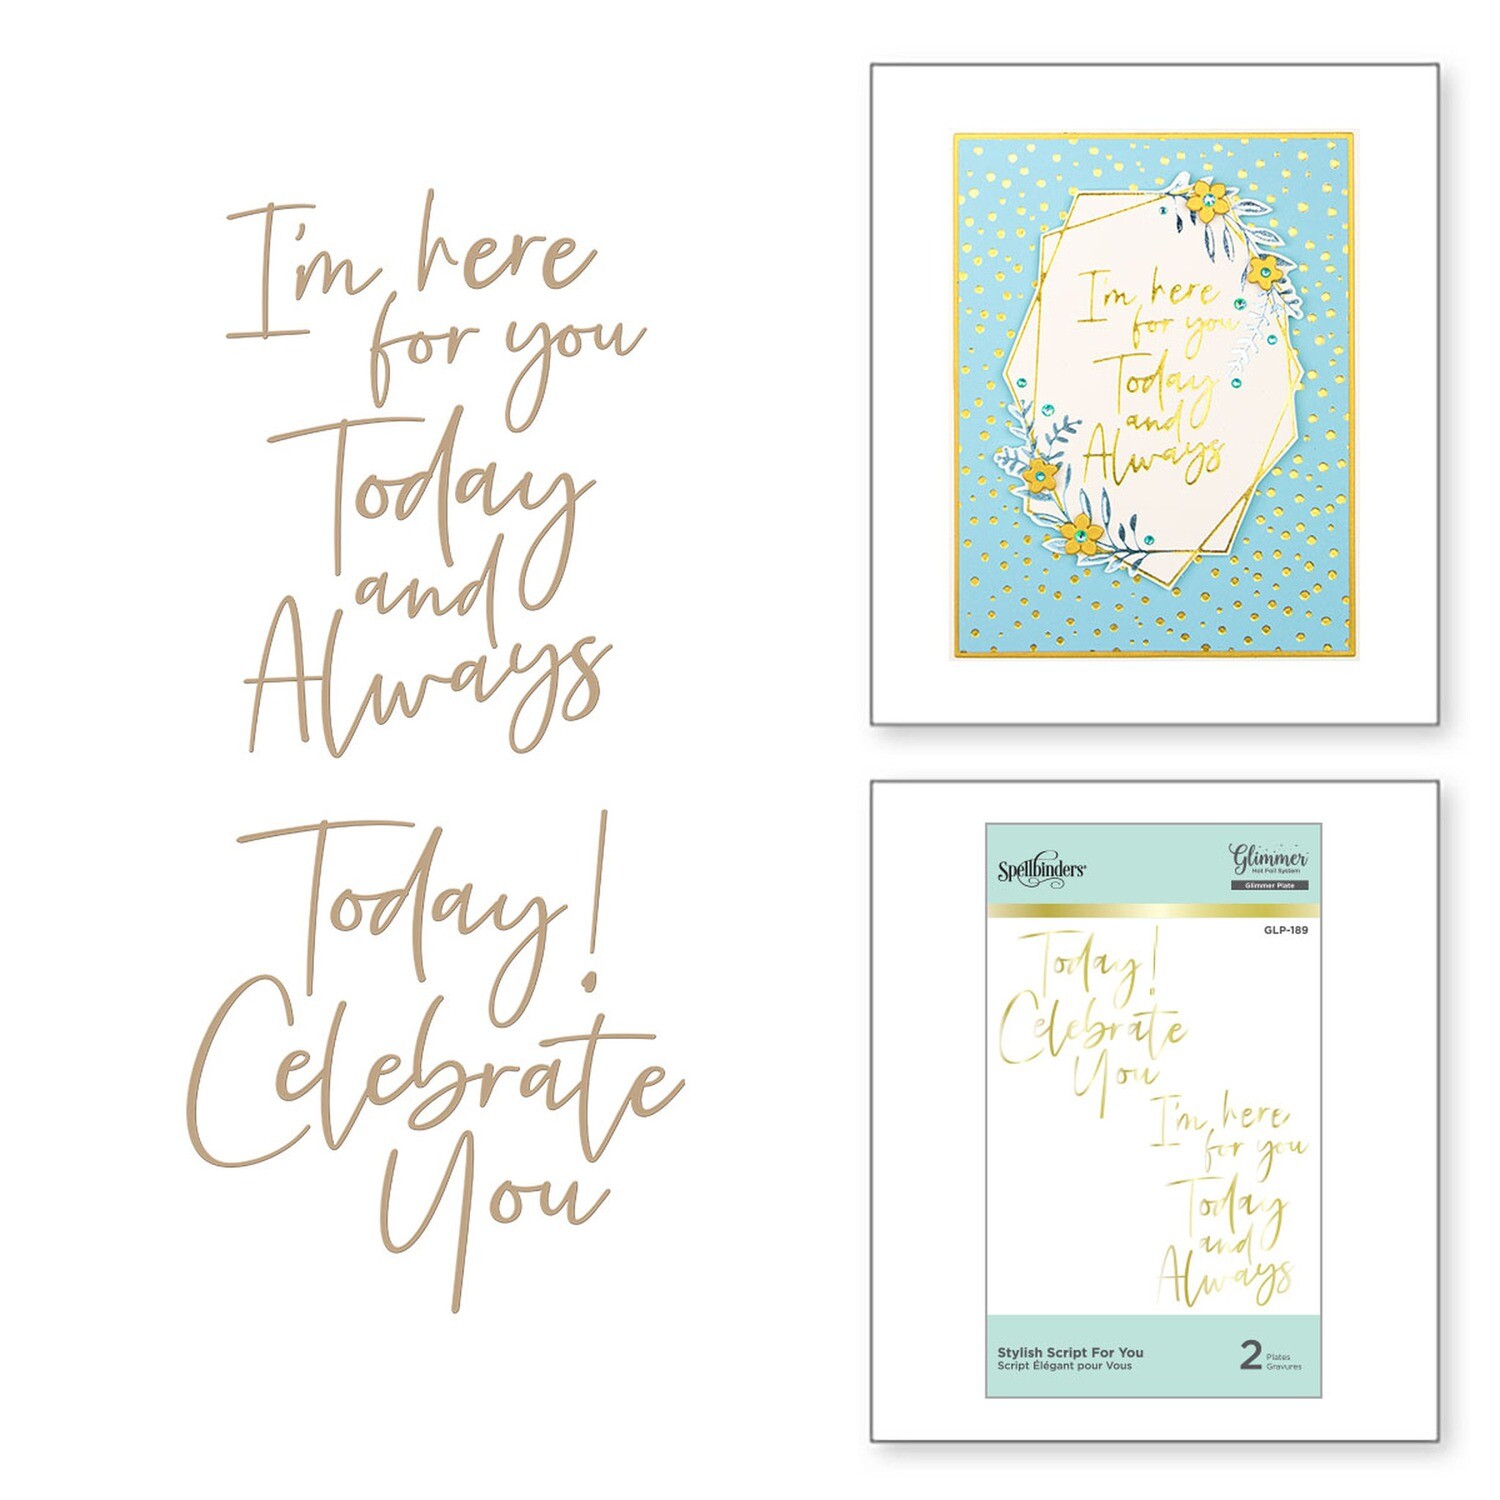 Spellbinders Glimmer Hot Foil Plate - Stylish Script For You